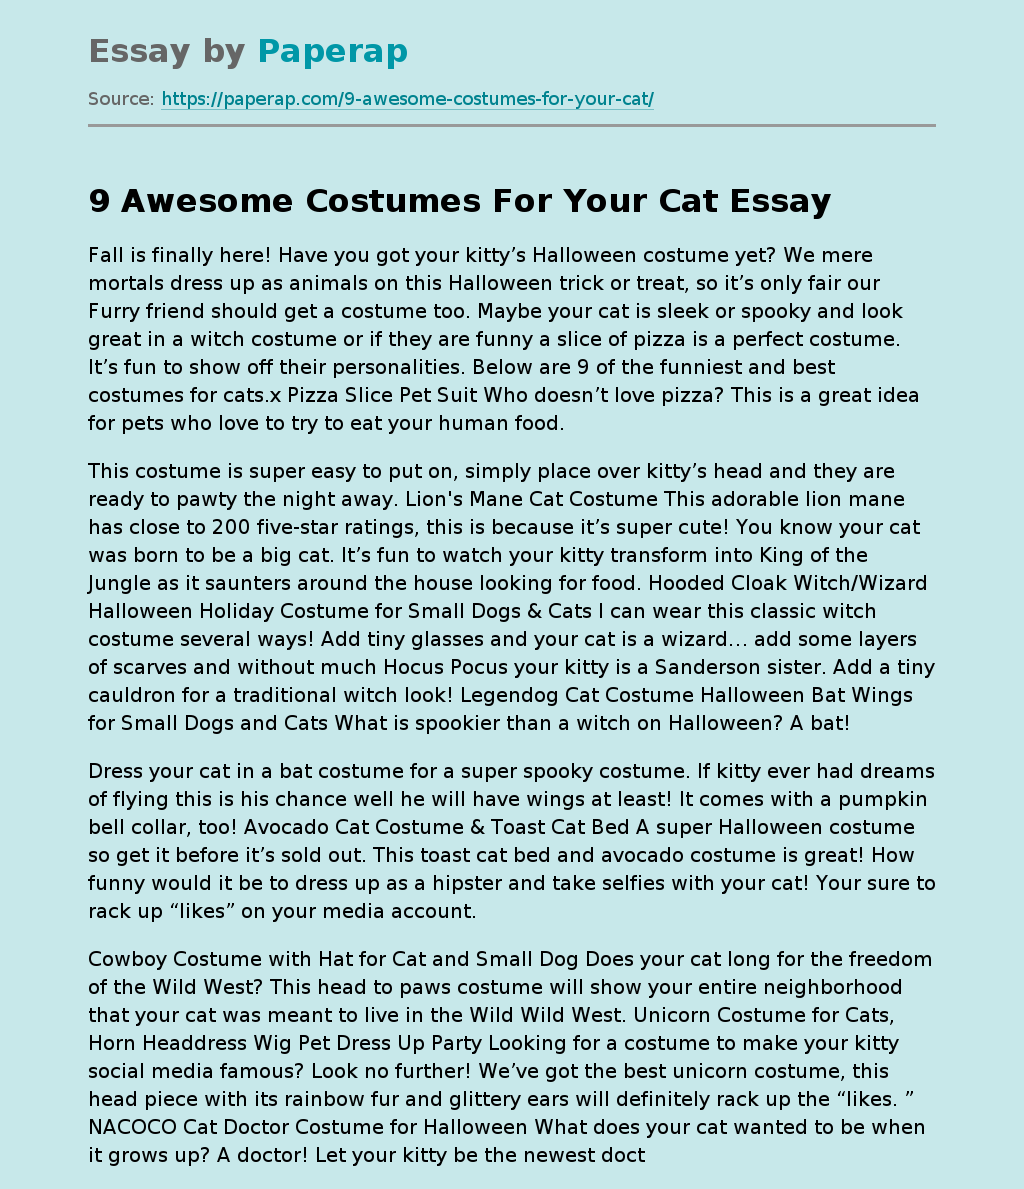 9 Awesome Costumes For Your Cat